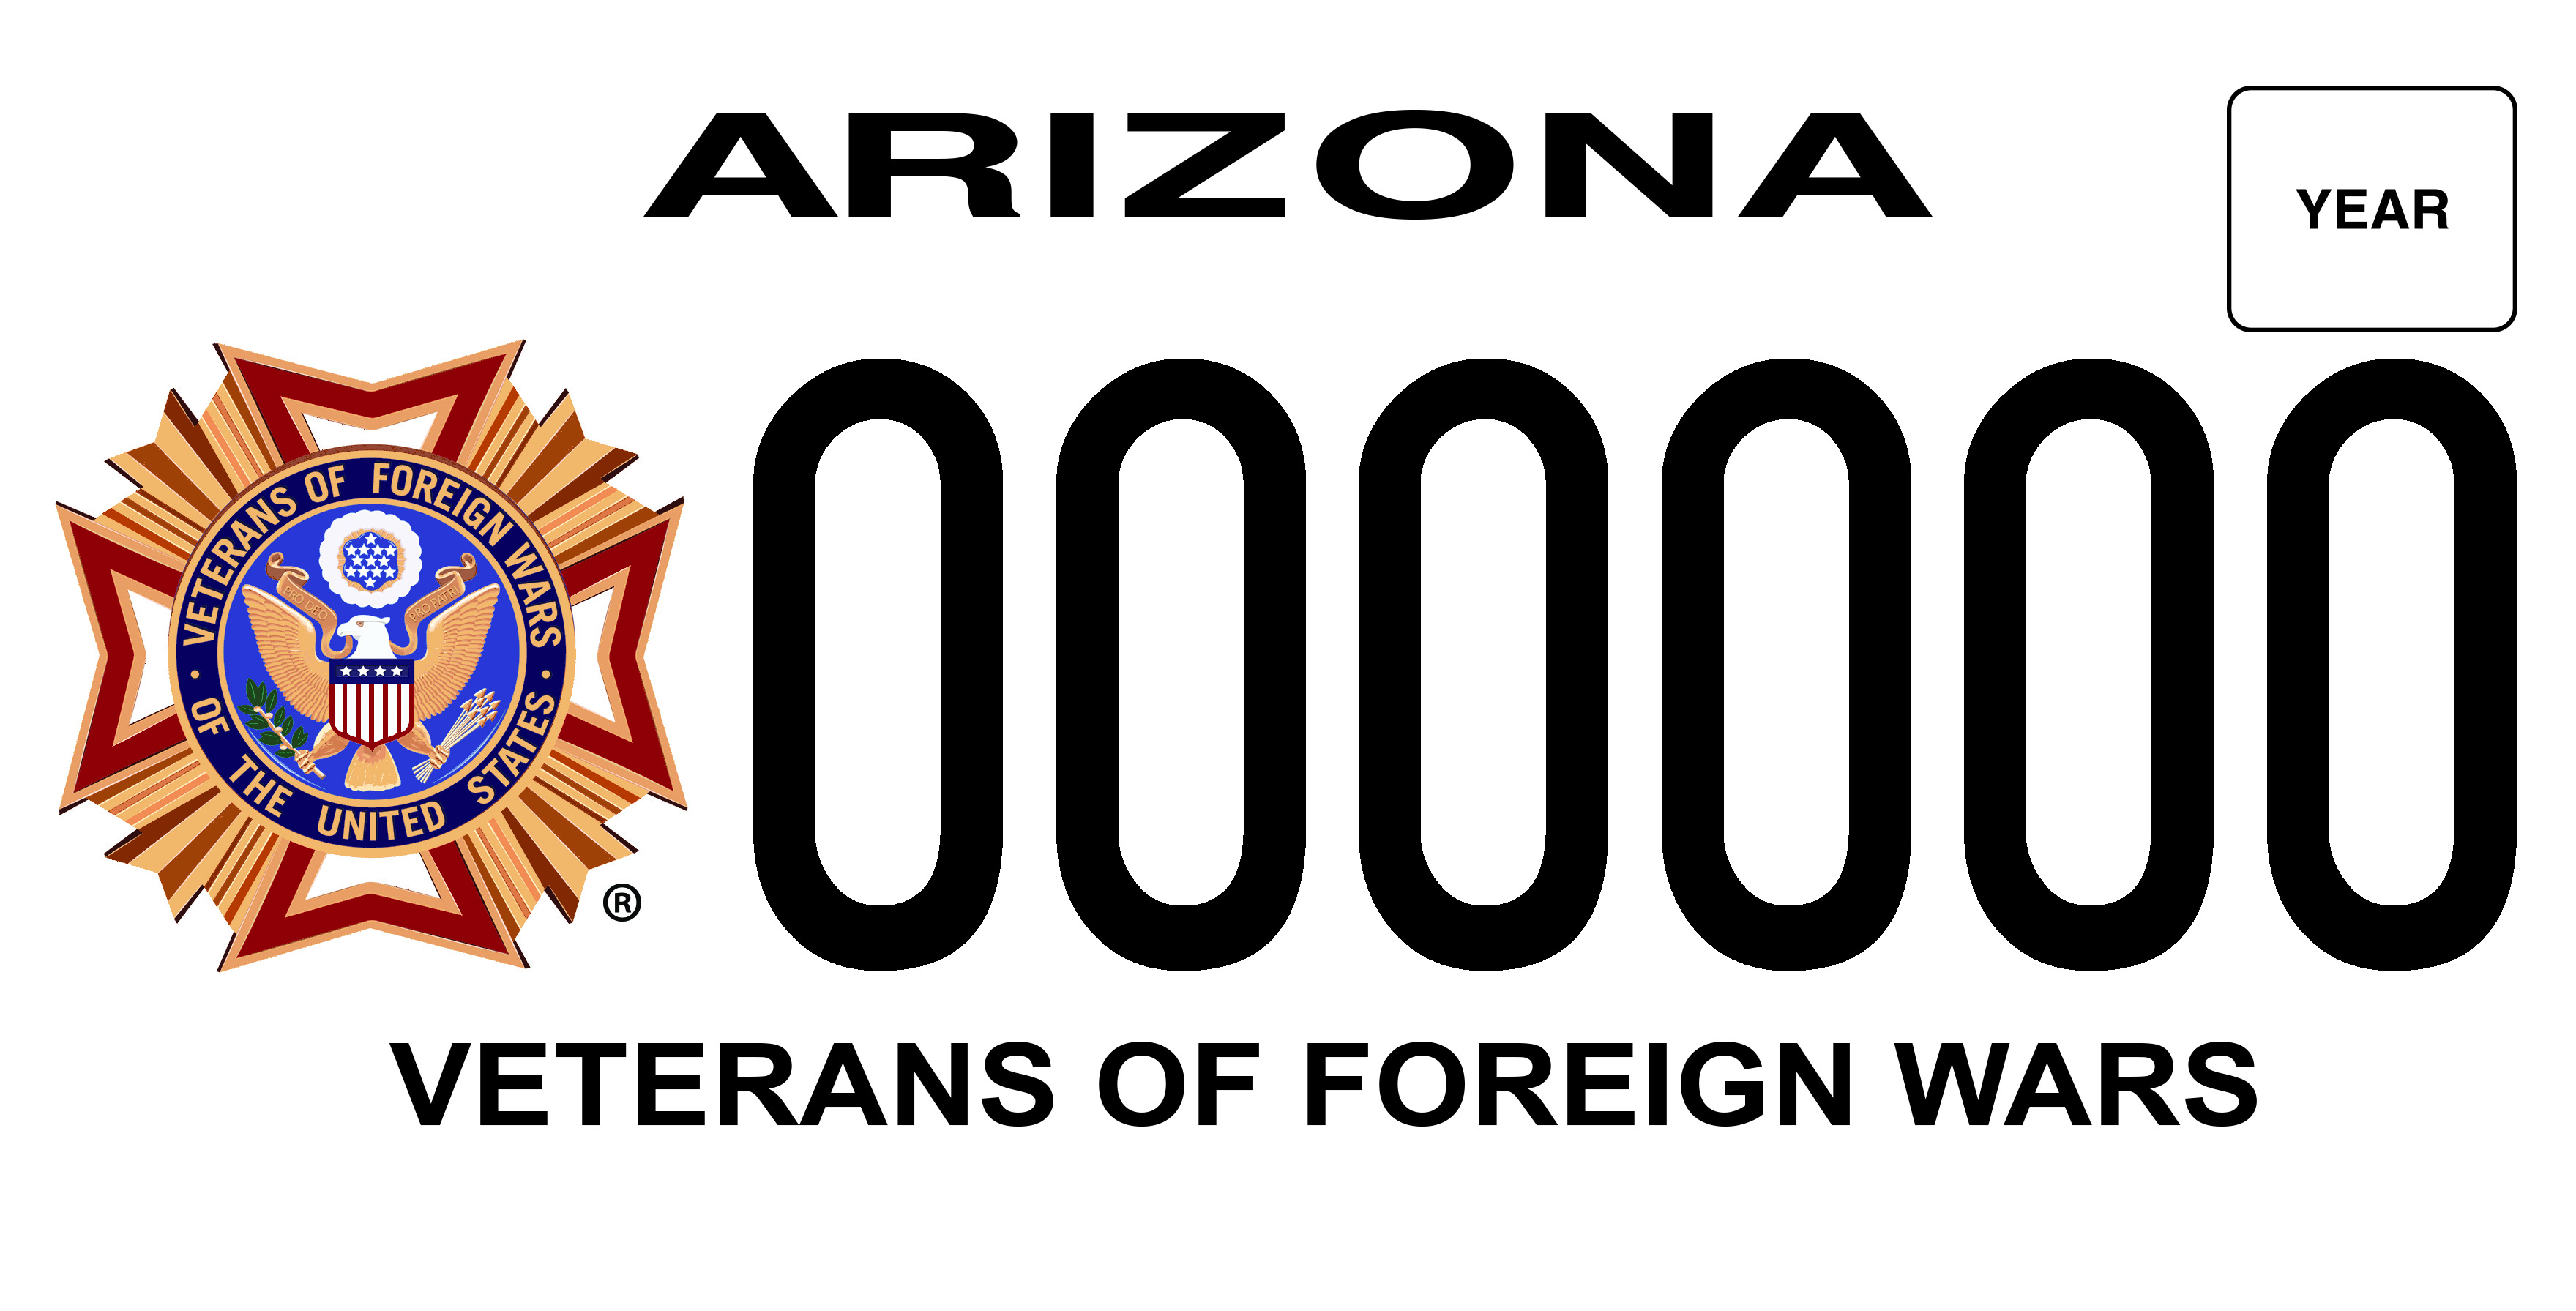 Veteran of Foreign Wars license plate